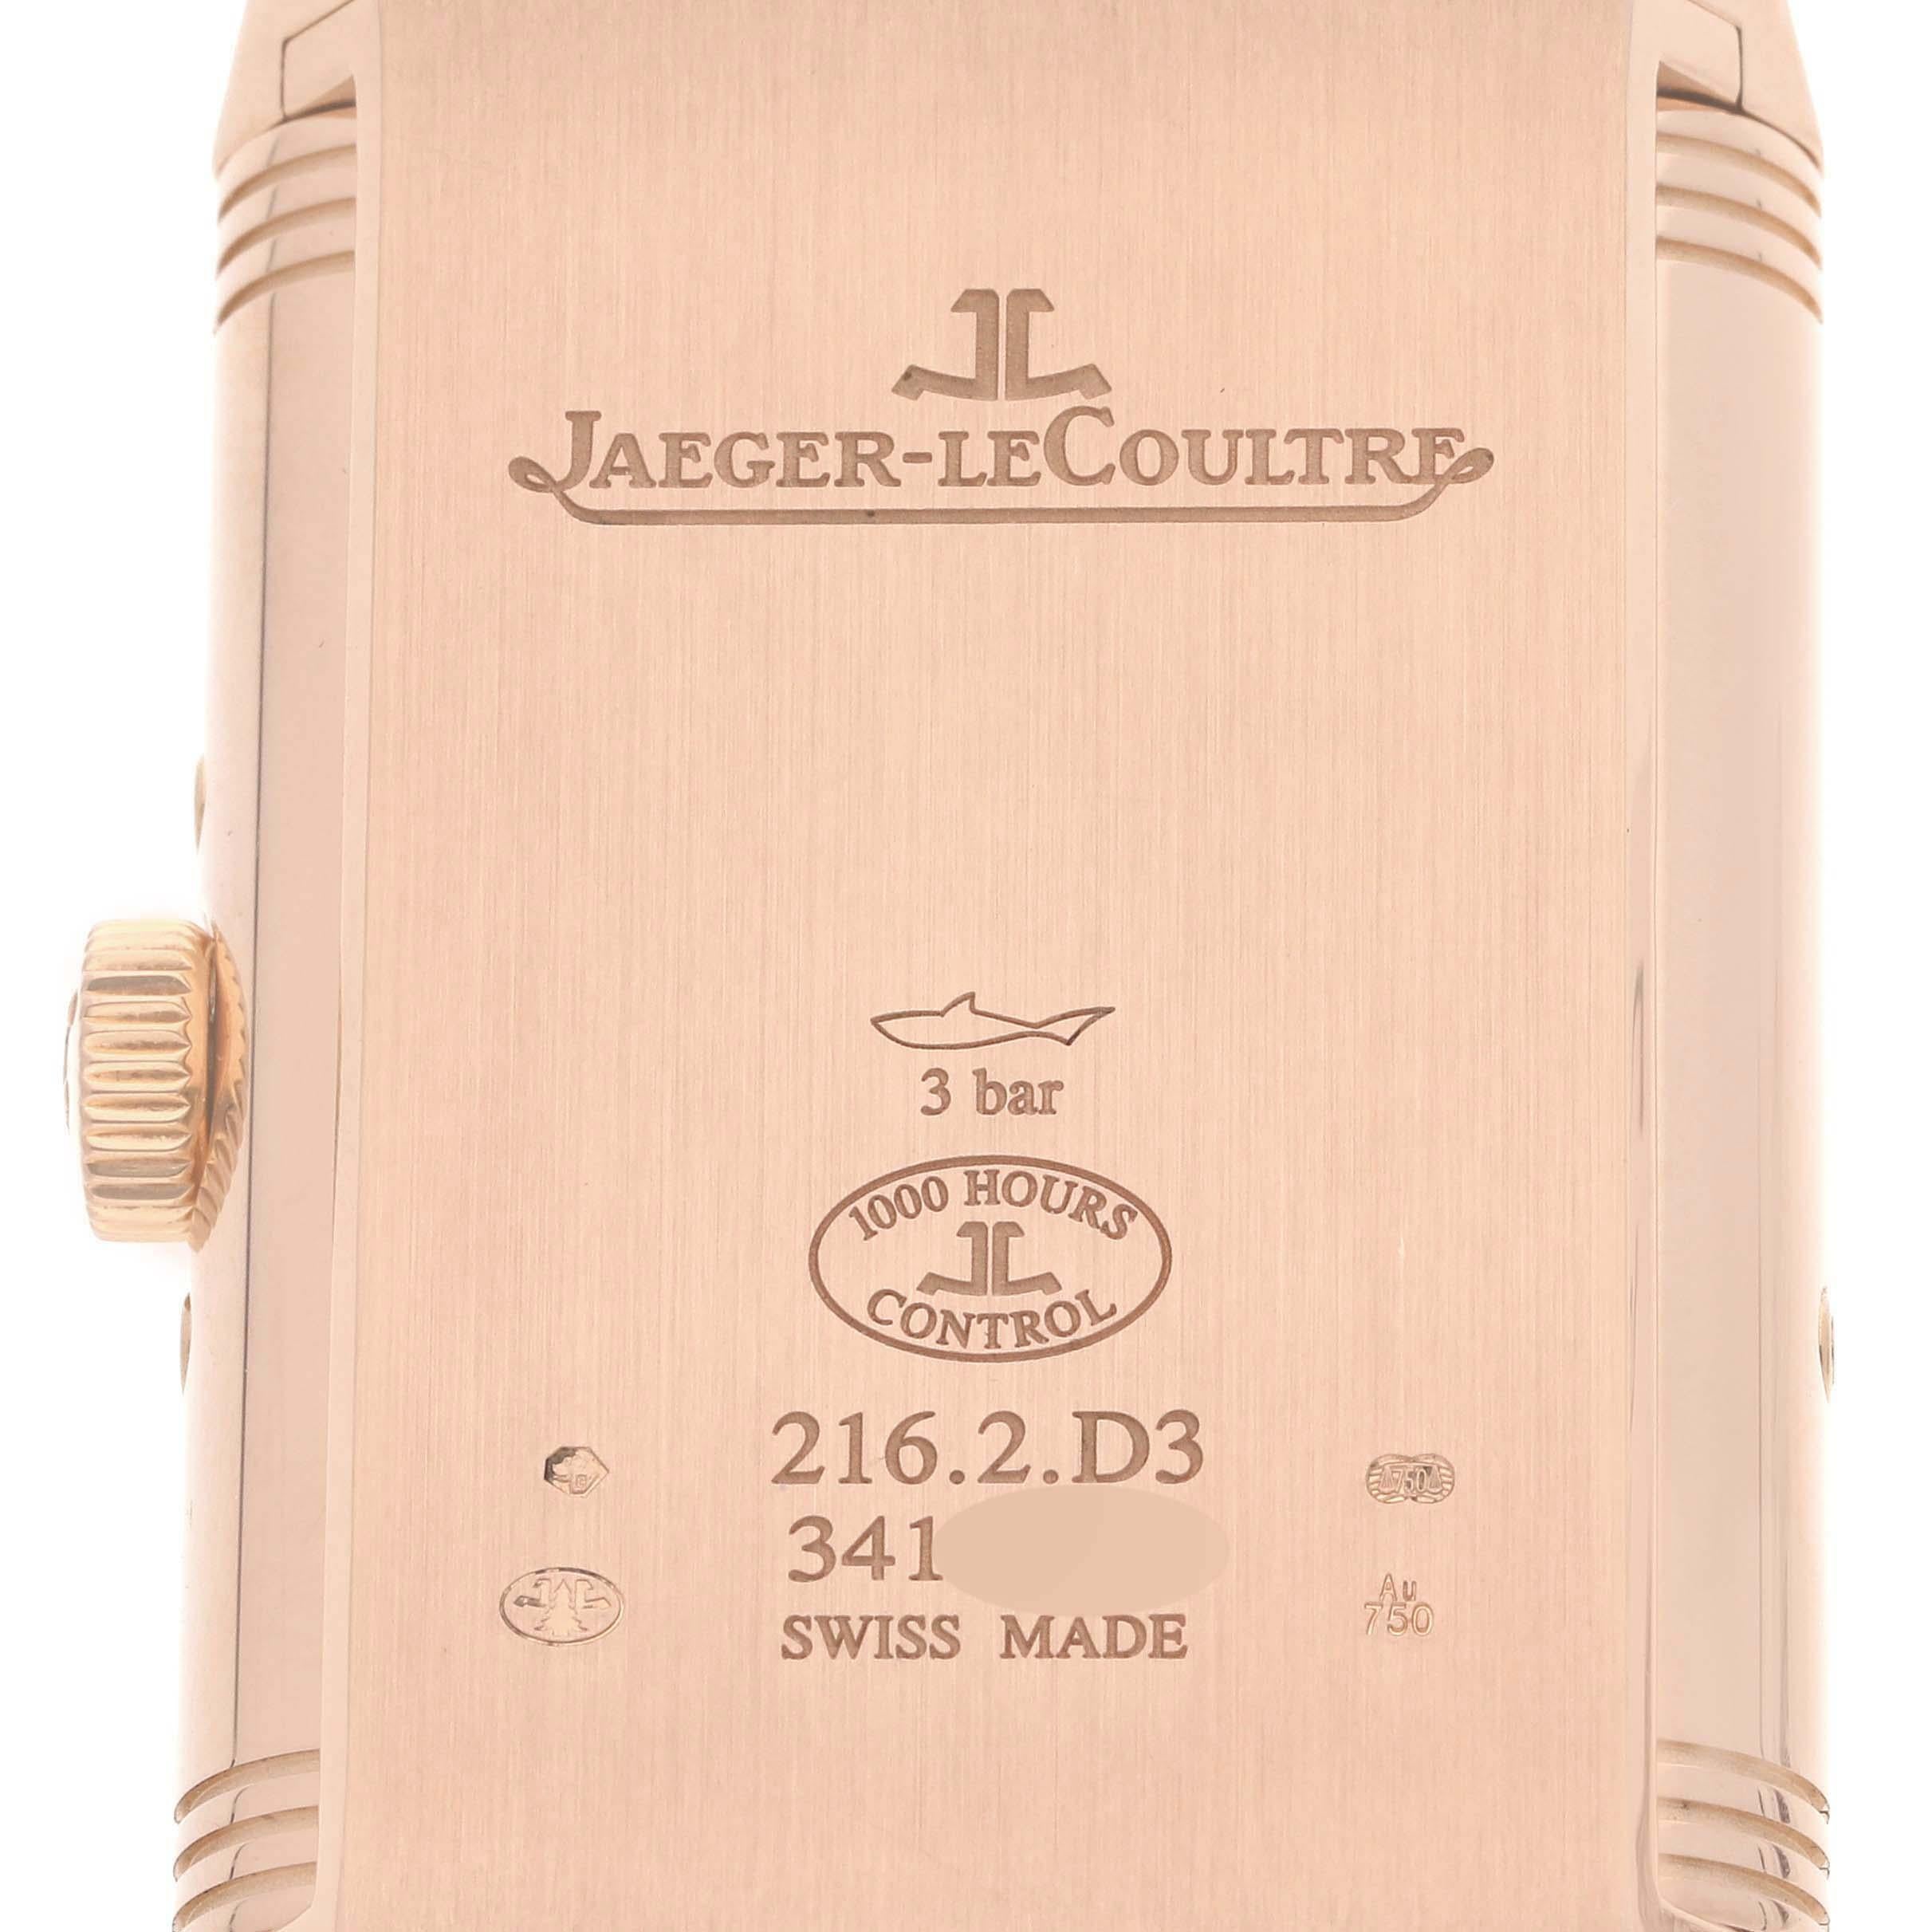 Jaeger LeCoultre Reverso Tribute Duoface Rose Gold Mens Watch 216.2.D3 Q3912420 Card. Manual-winding movement. Rhodium plated with engine turned embellishment, 19 jewels, 223 components, a single barrel, blued screws, shock absorber system,